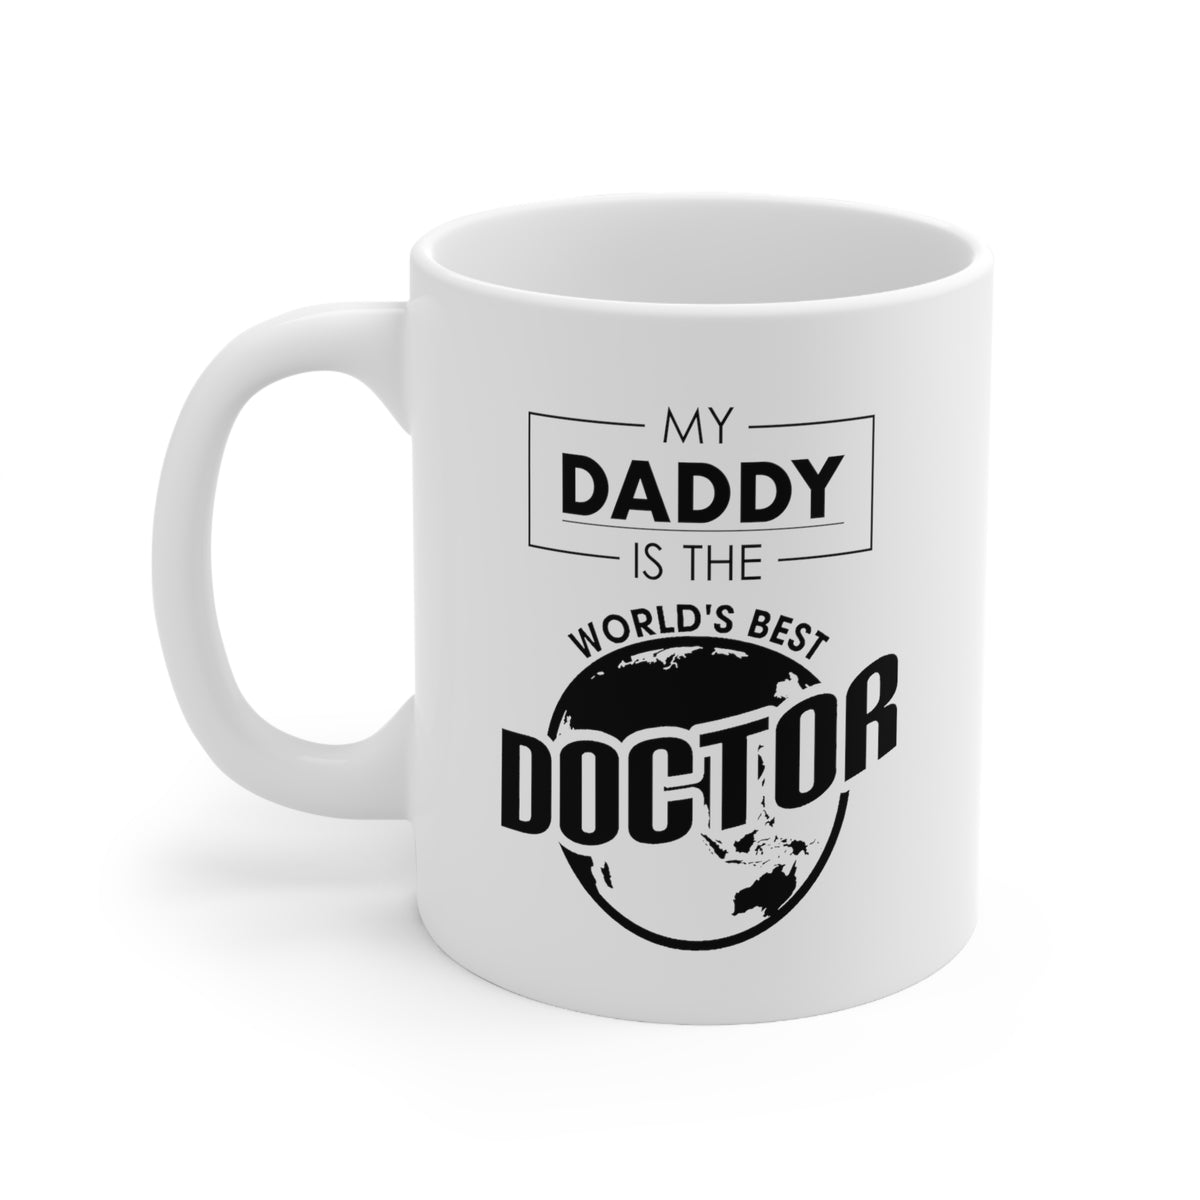 My Daddy Is The World's Best Doctor - Perfect Father's Day Tea Cup & Coffee Mug For Doctor